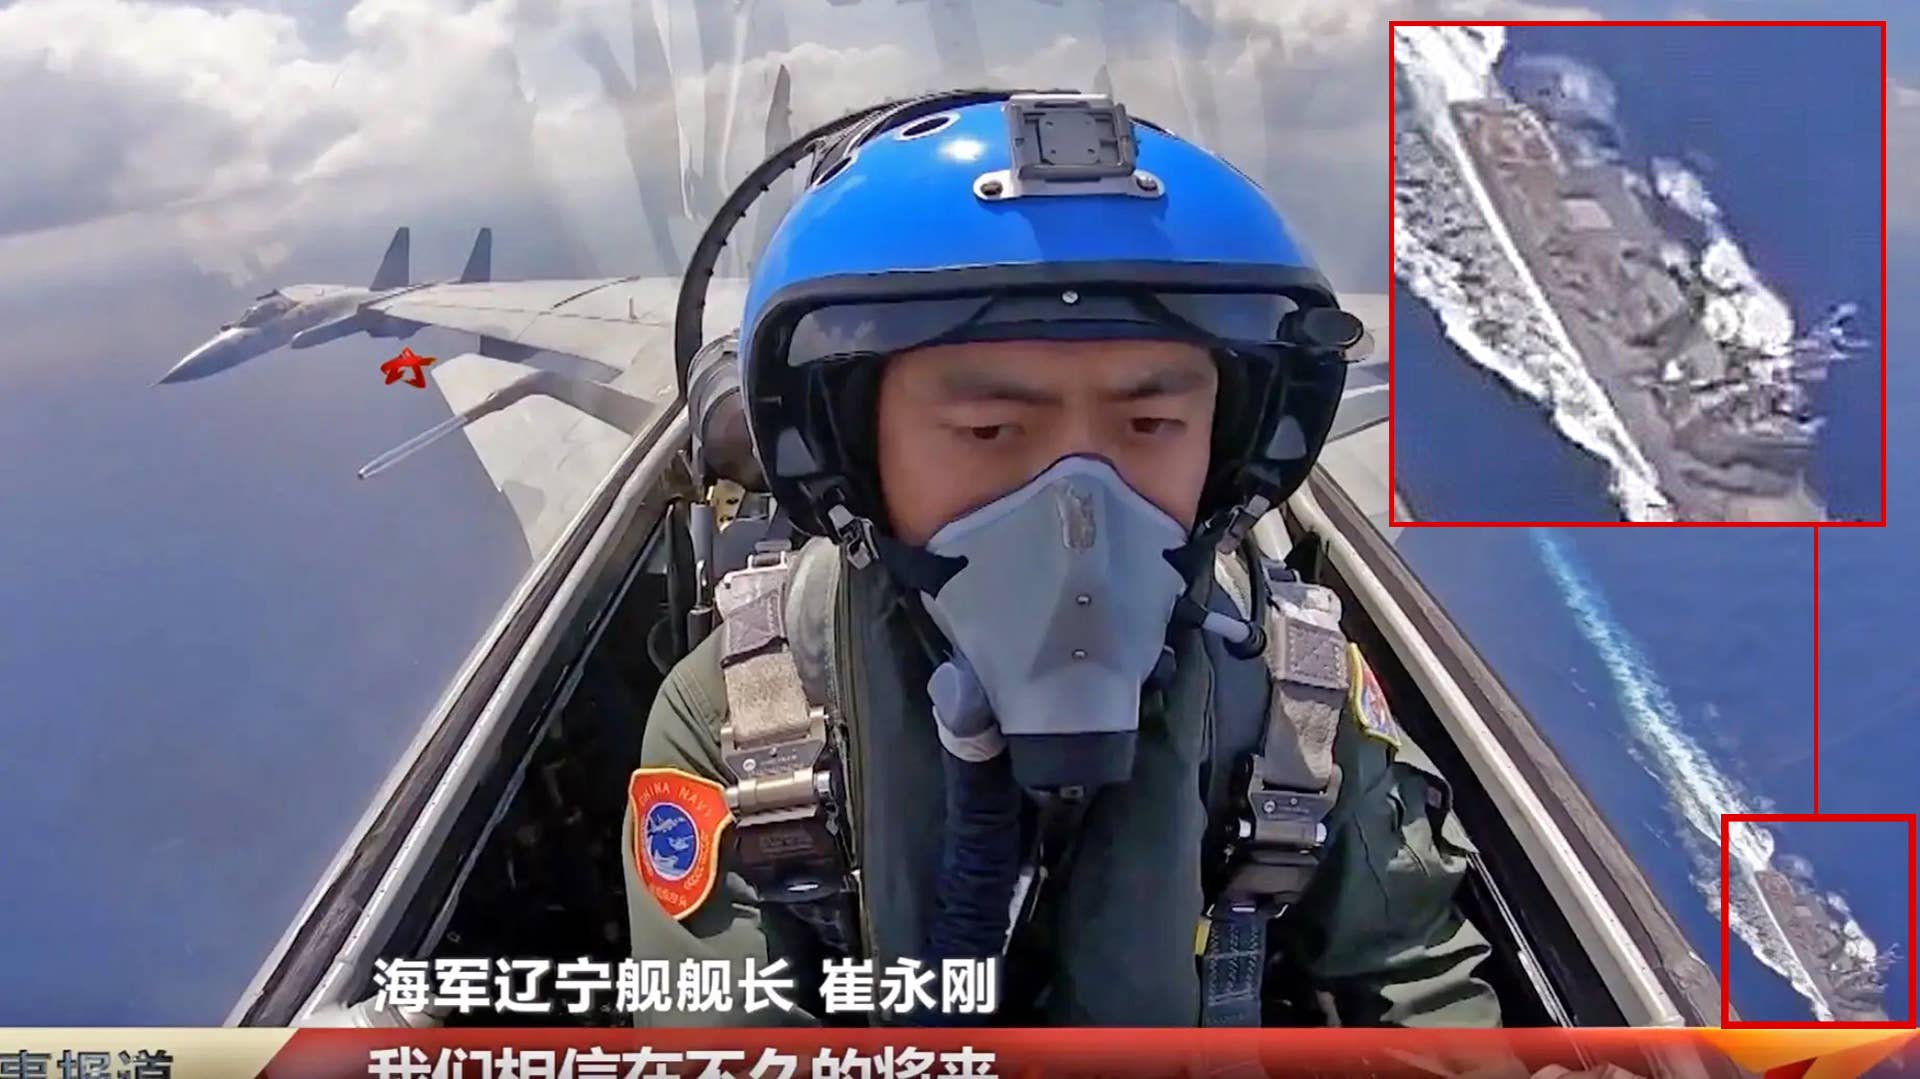 Chinese J-15 Fighters Fly Directly Over U.S. Navy Destroyer In New Video